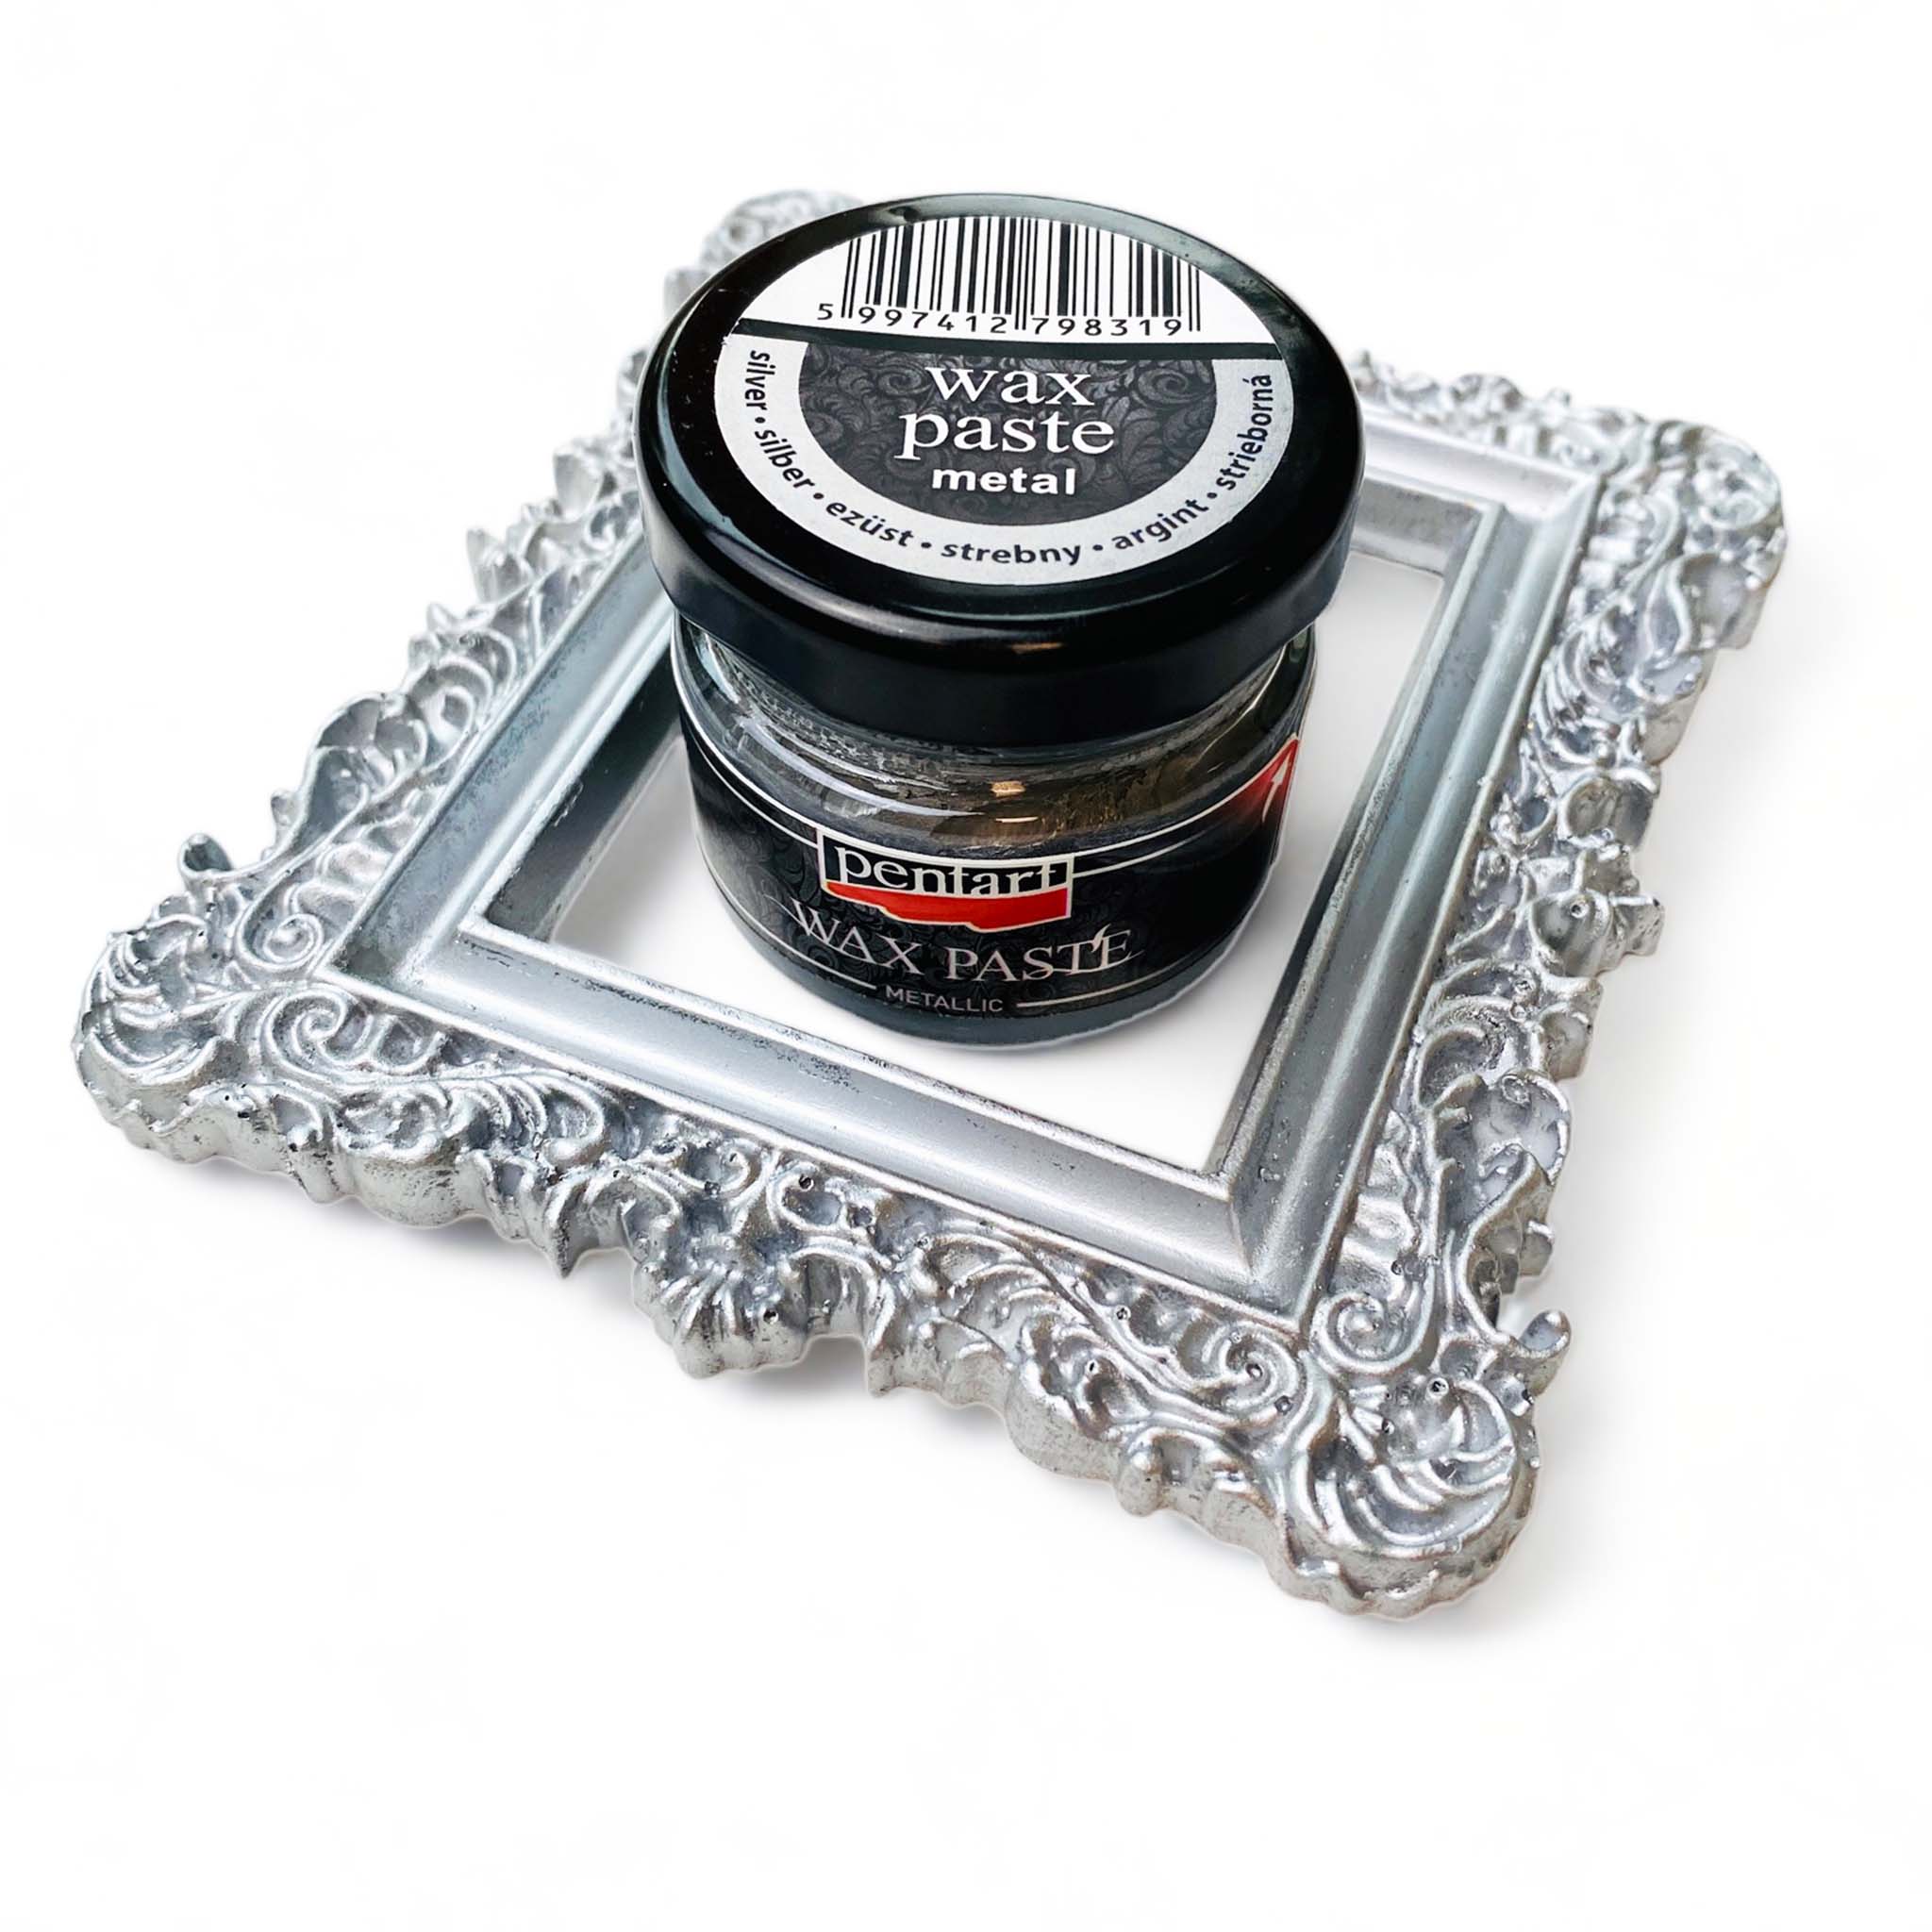 A jar of a 0.68 ounce jar of metallic silver wax paste by Pentart is sitting inside a silicone casting of an ornate picture frame covered with the wax. Both are on a white background.